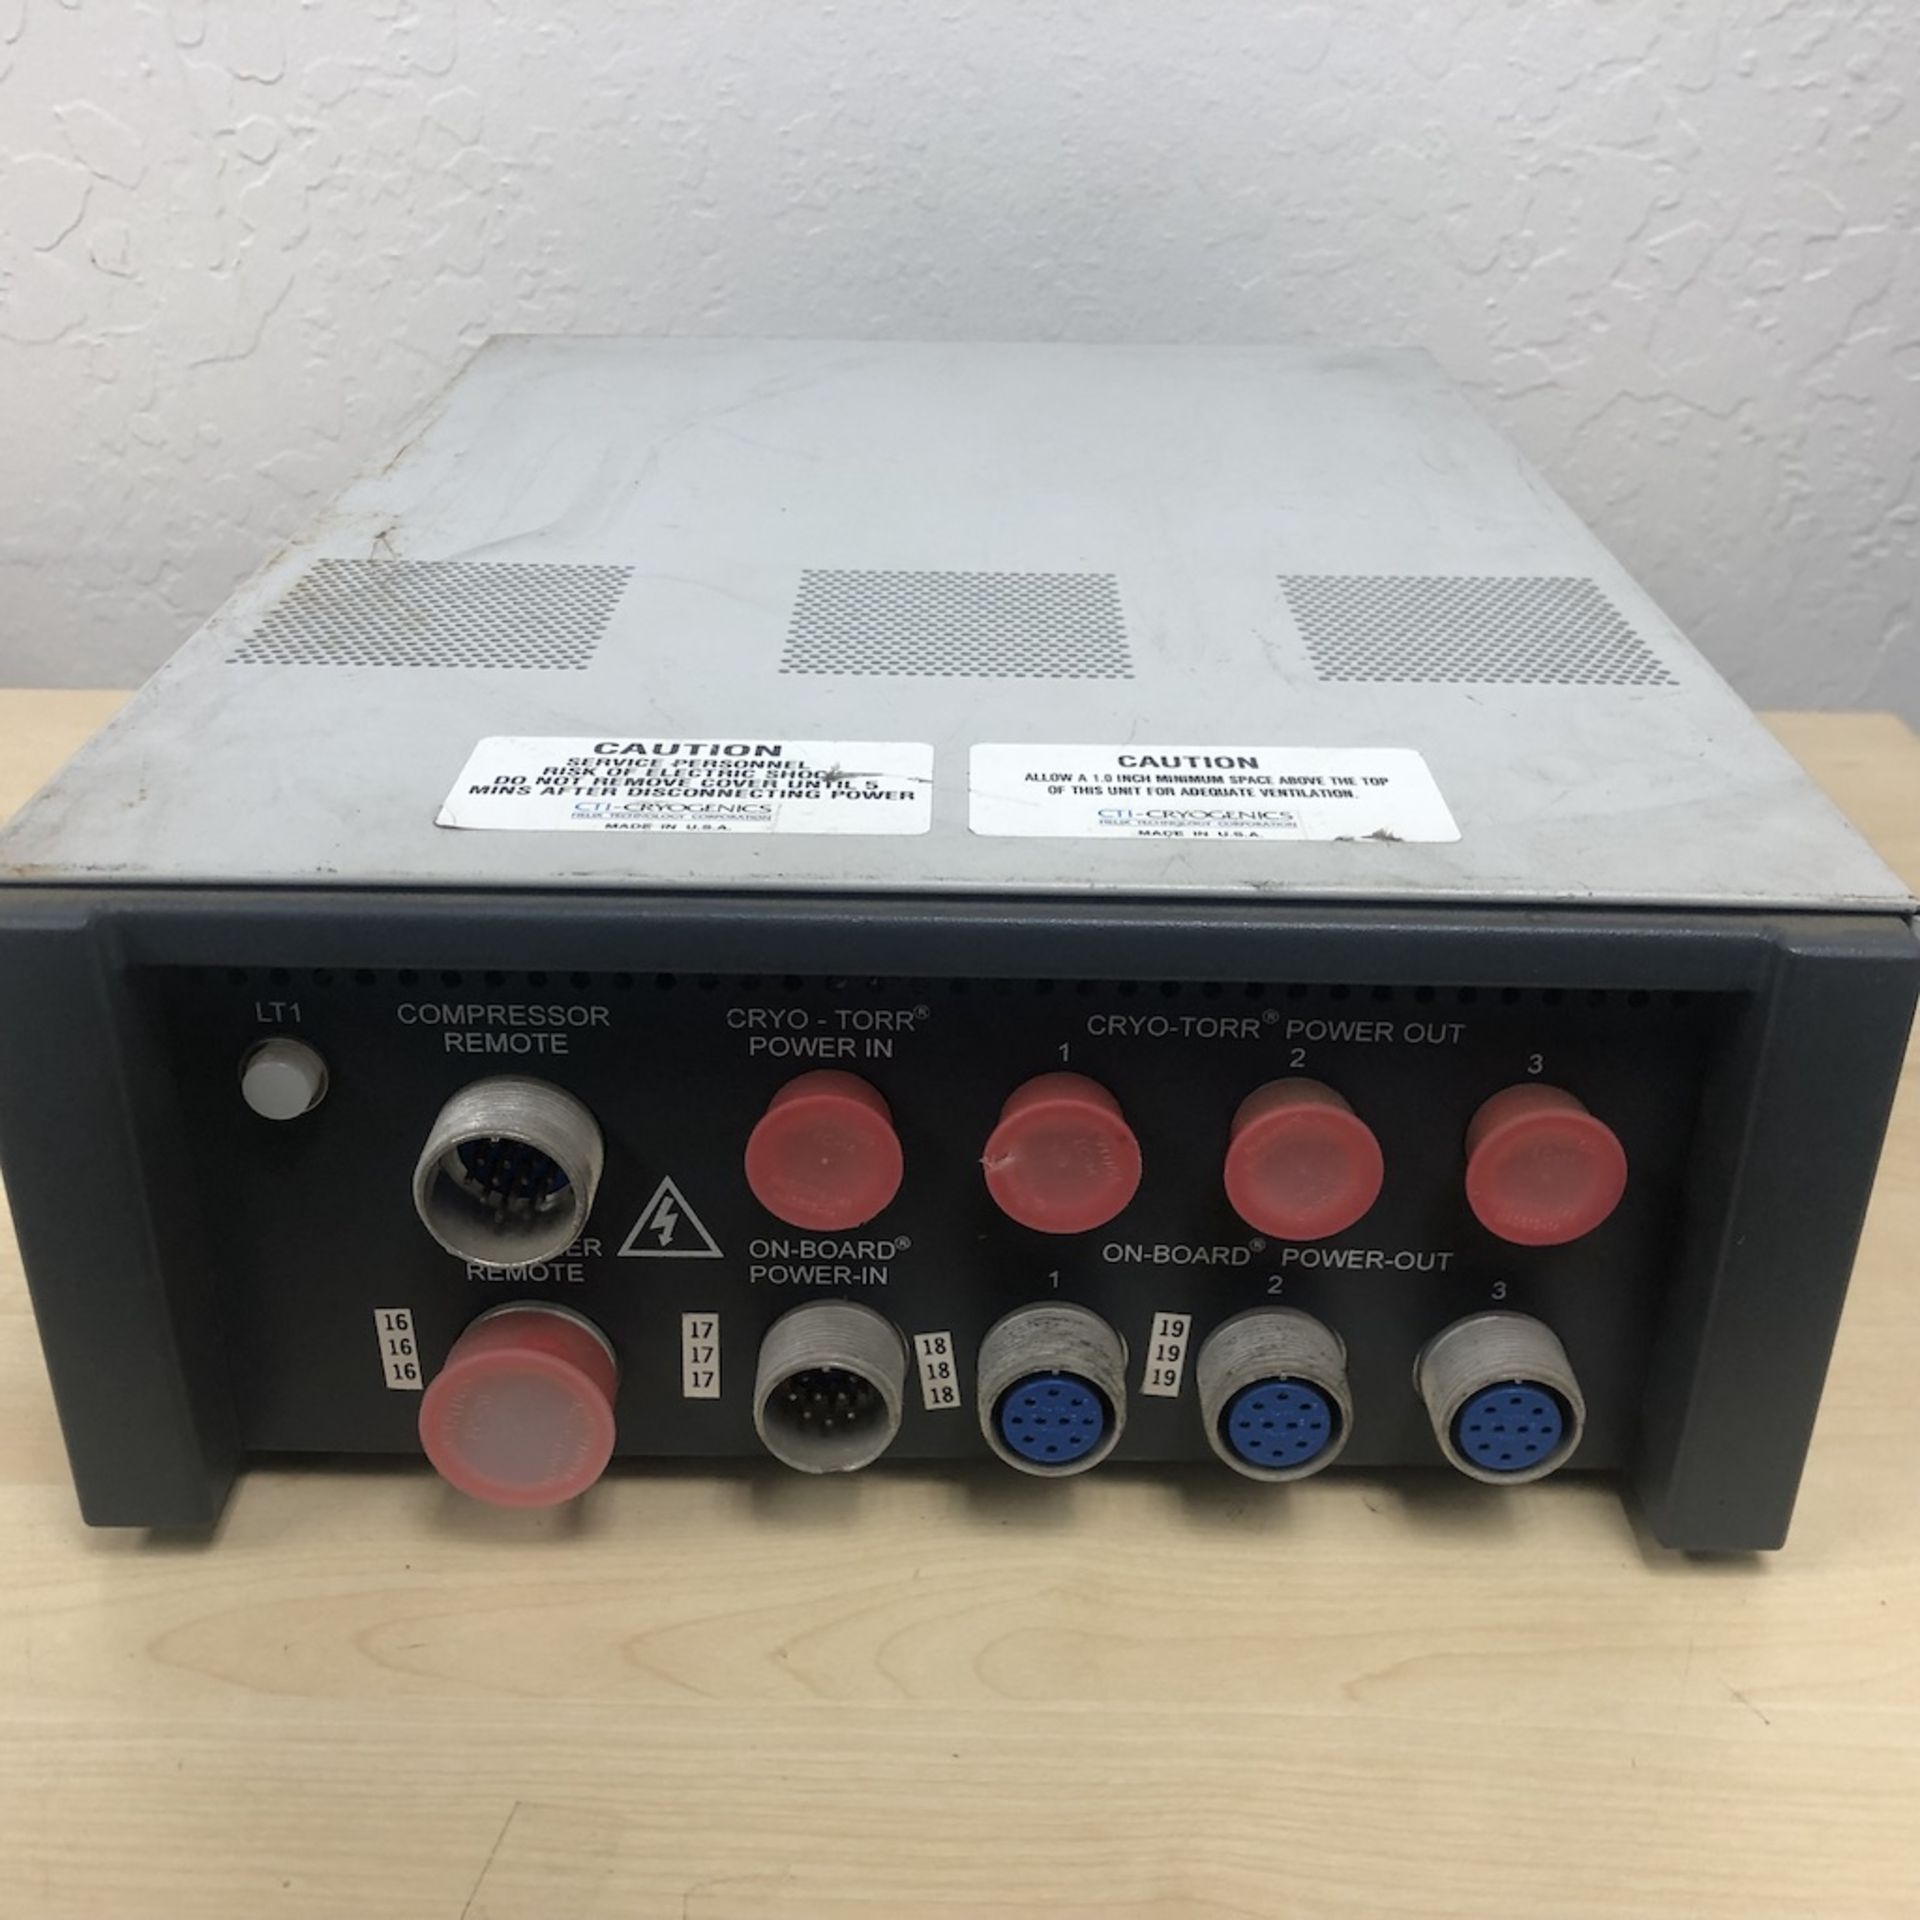 CTI CRYOGENICS HELIX TECHNOLOGY CORPORATION 8043202G002 ON-BOARD FREQUENCY CONVERTER - Image 7 of 10